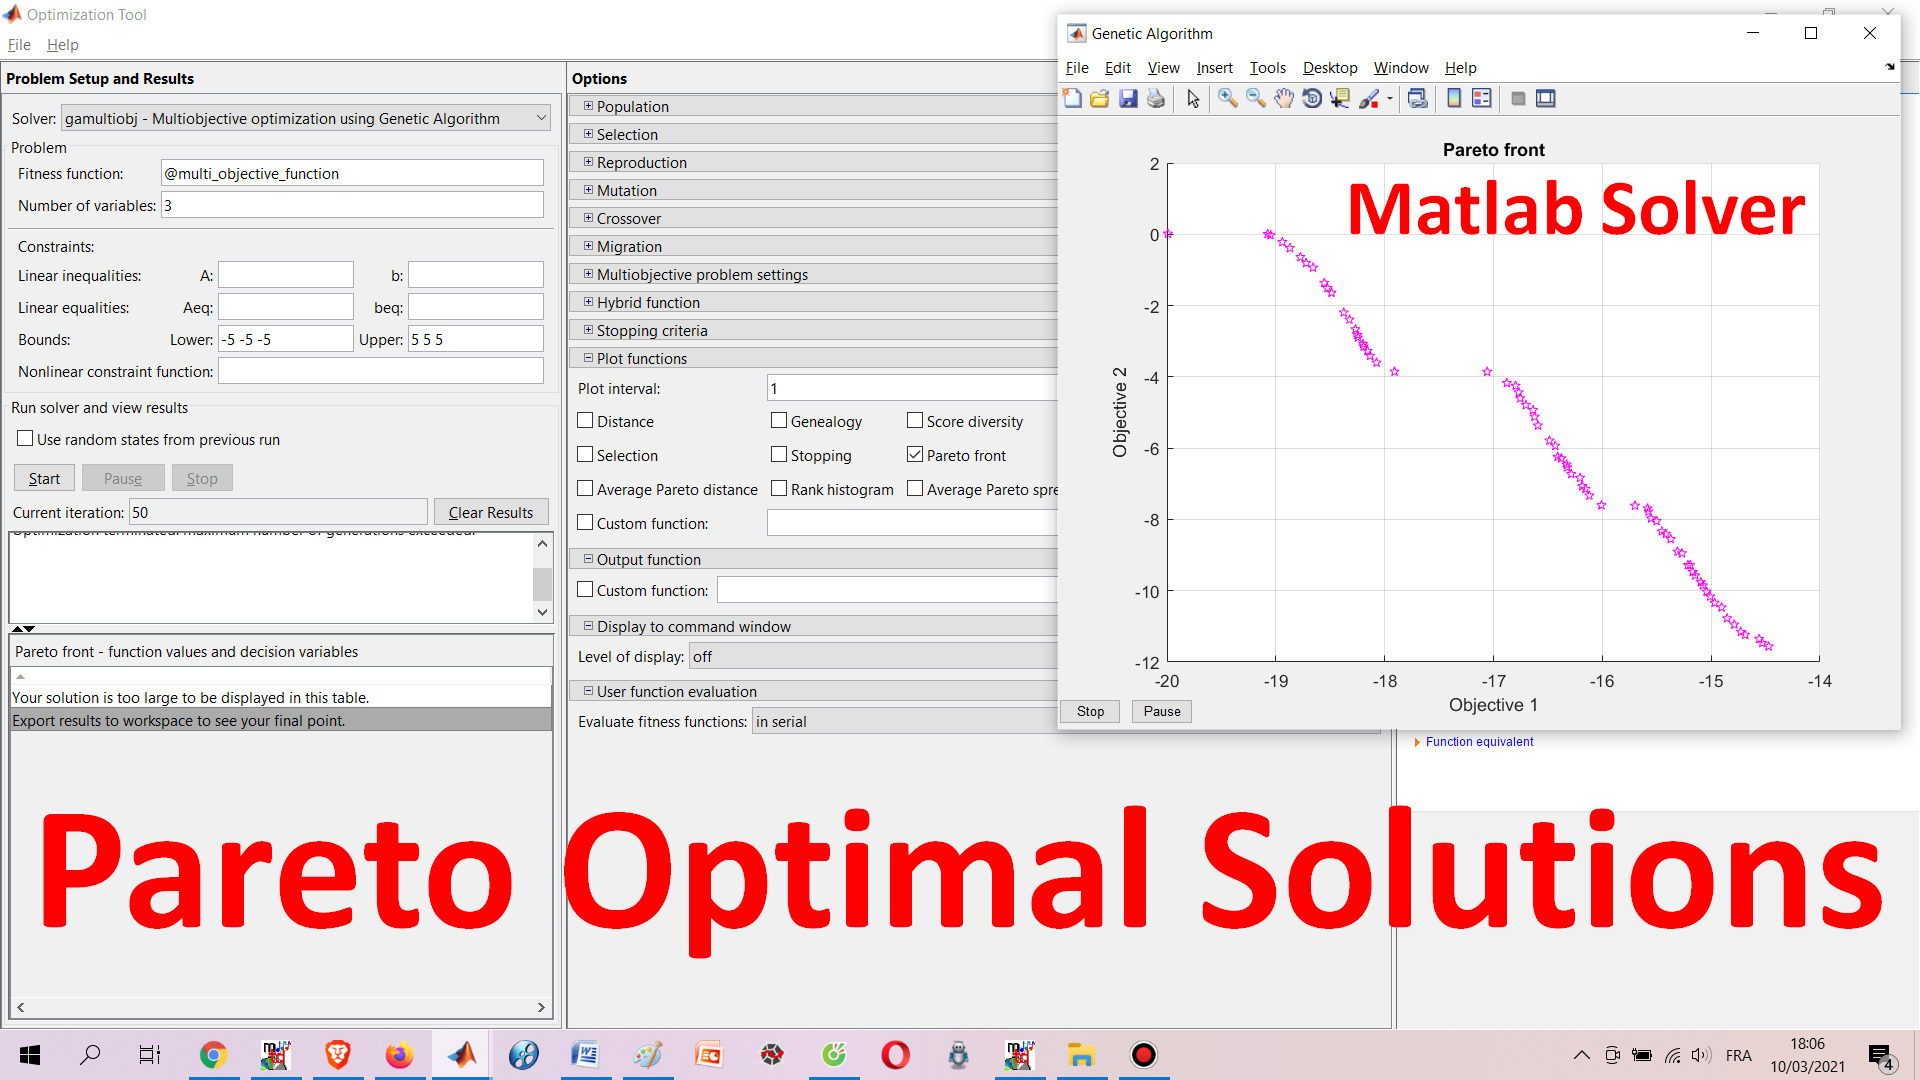 How to Find Pareto Optimal Solutions Using Matlab?